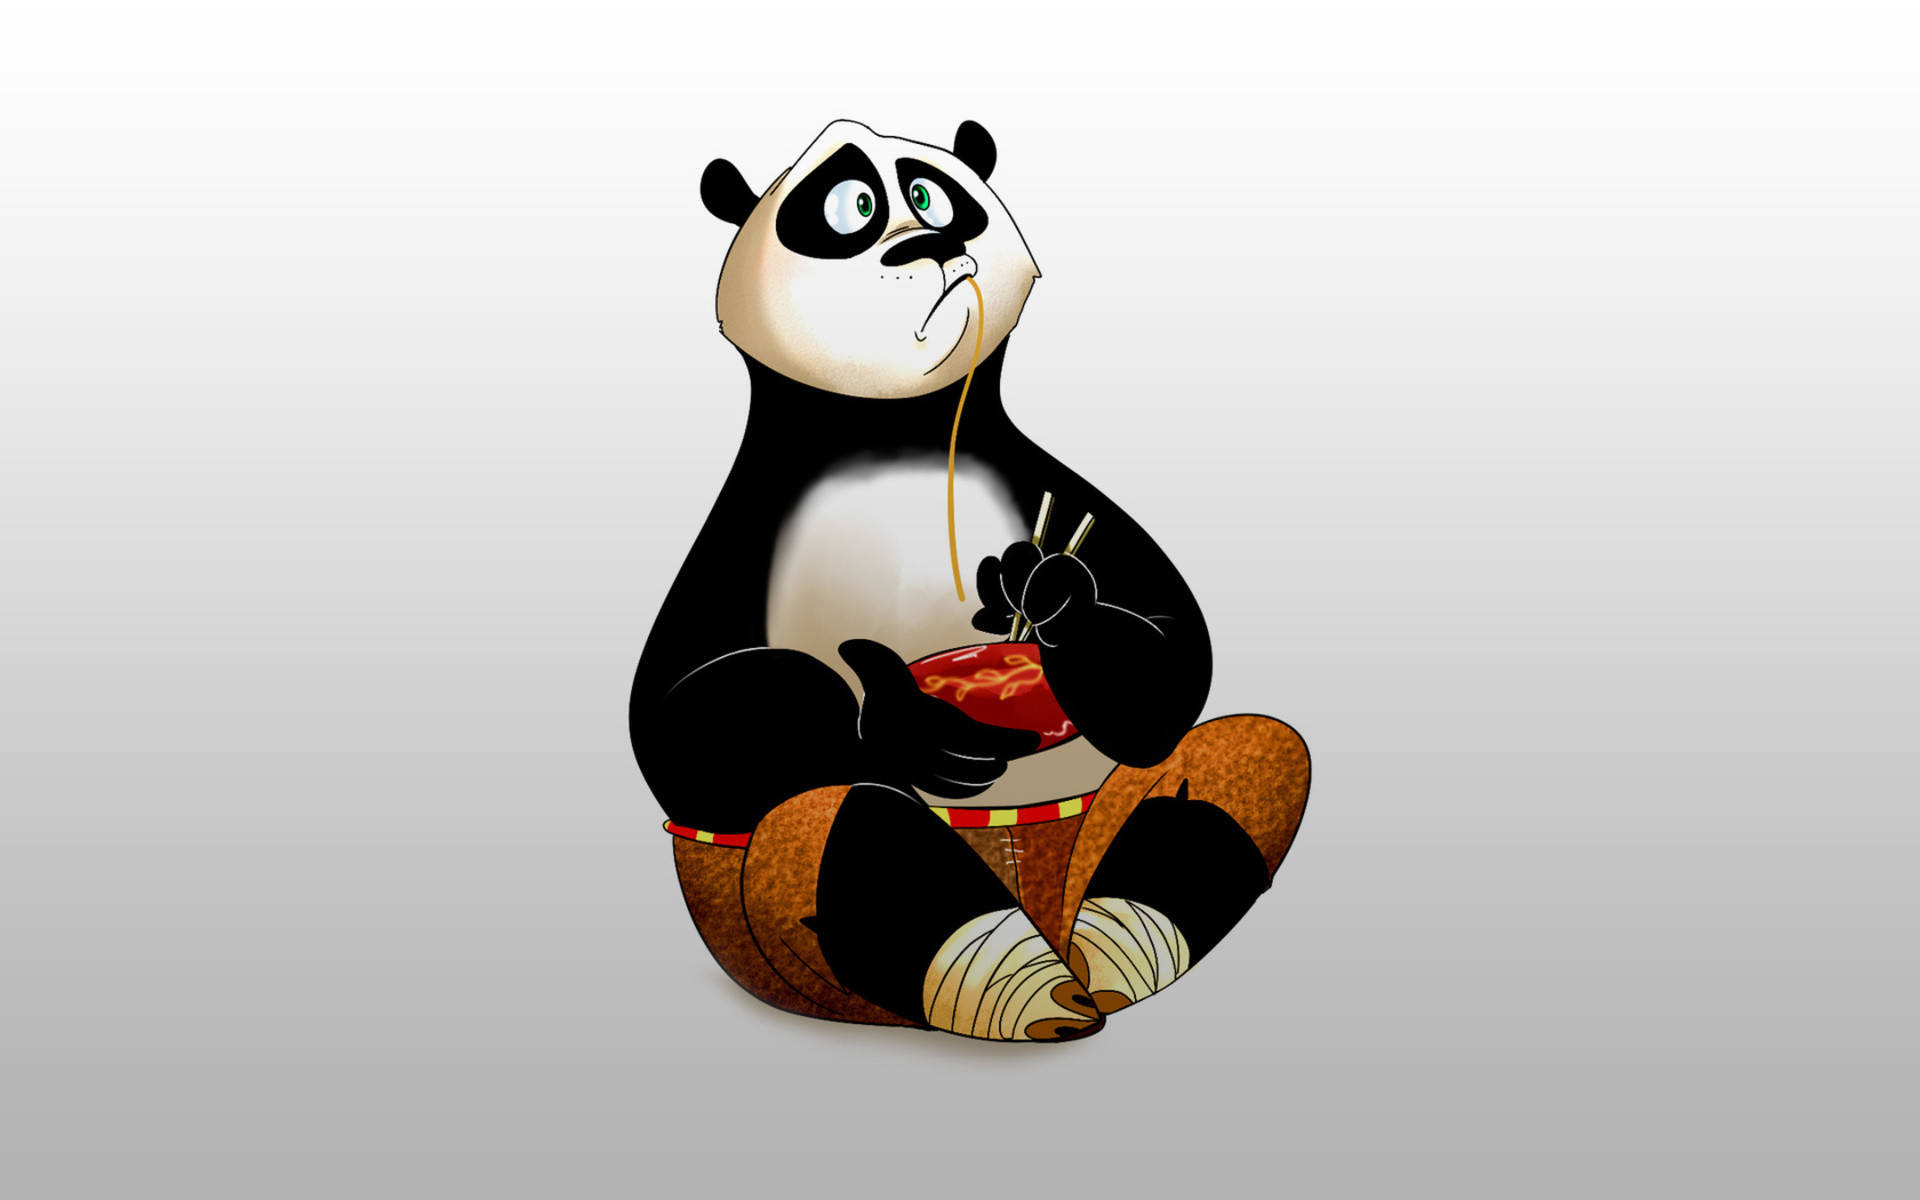 Po The Panda Enthusiastically Indulging In His Favorite Bowl Of Noodles! Background